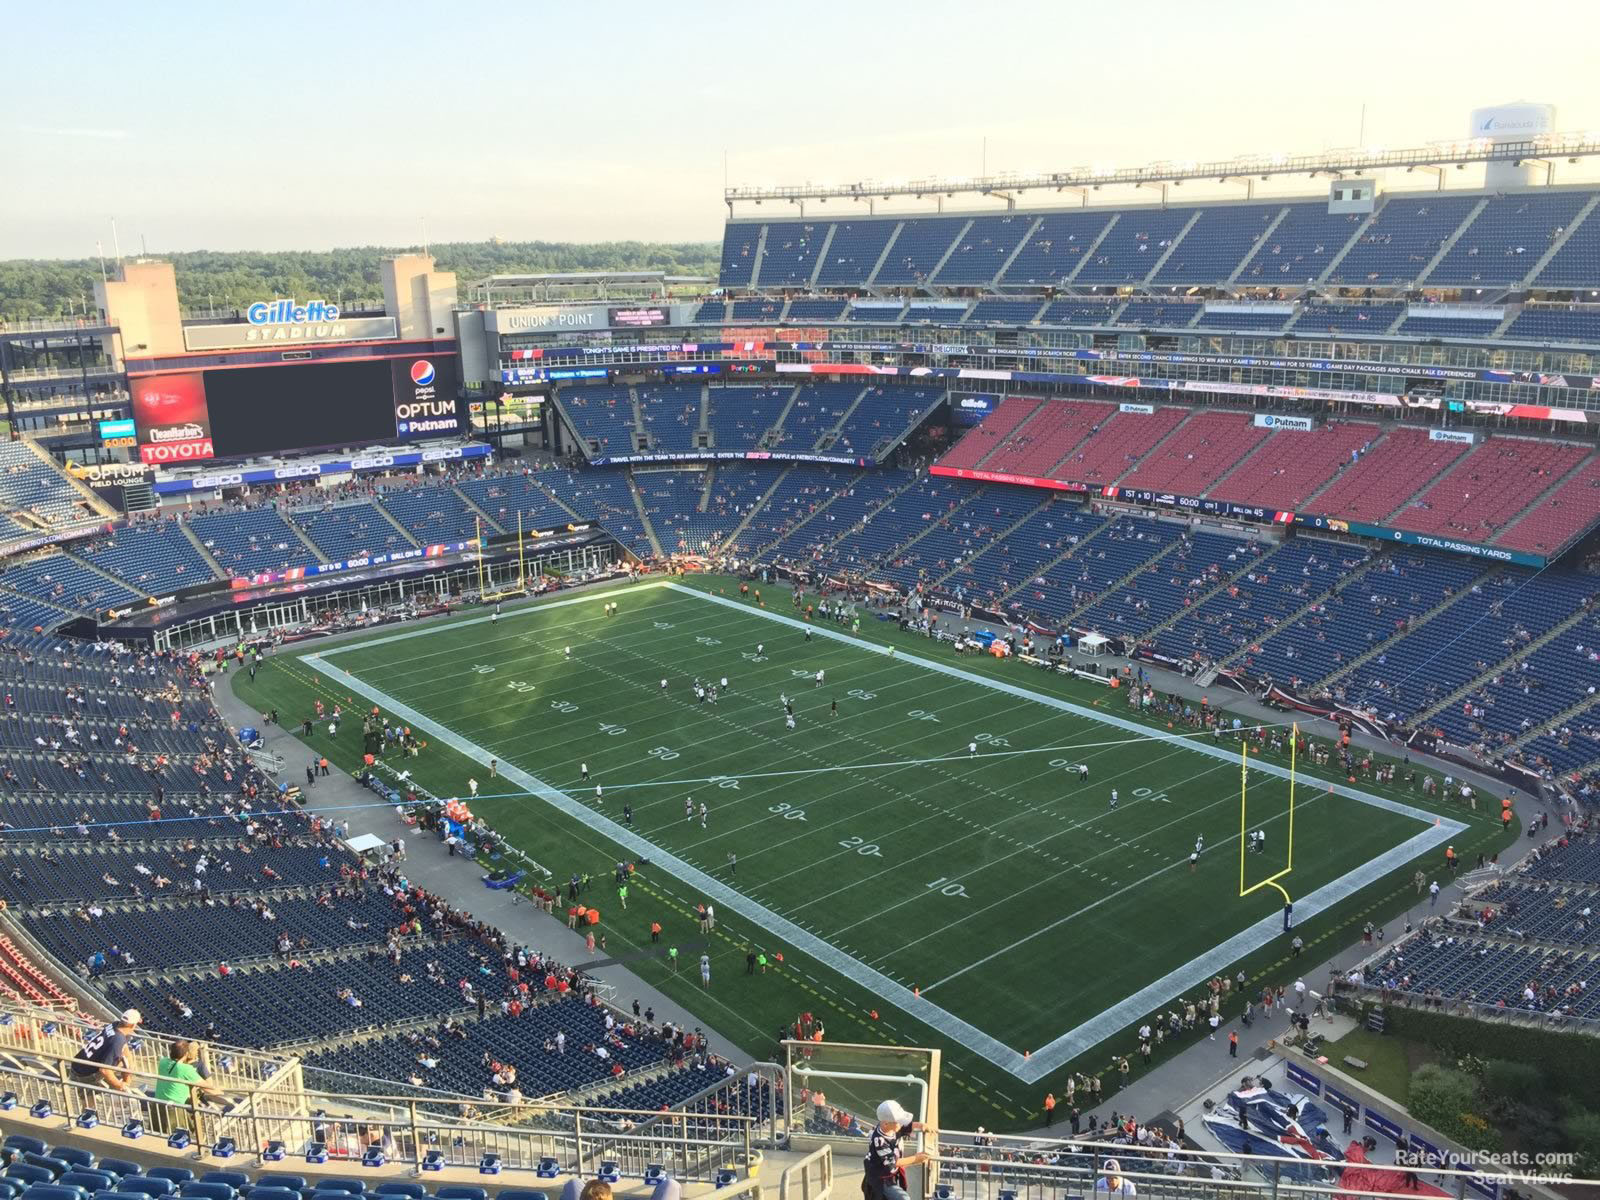 section 301, row 19 seat view  for football - gillette stadium